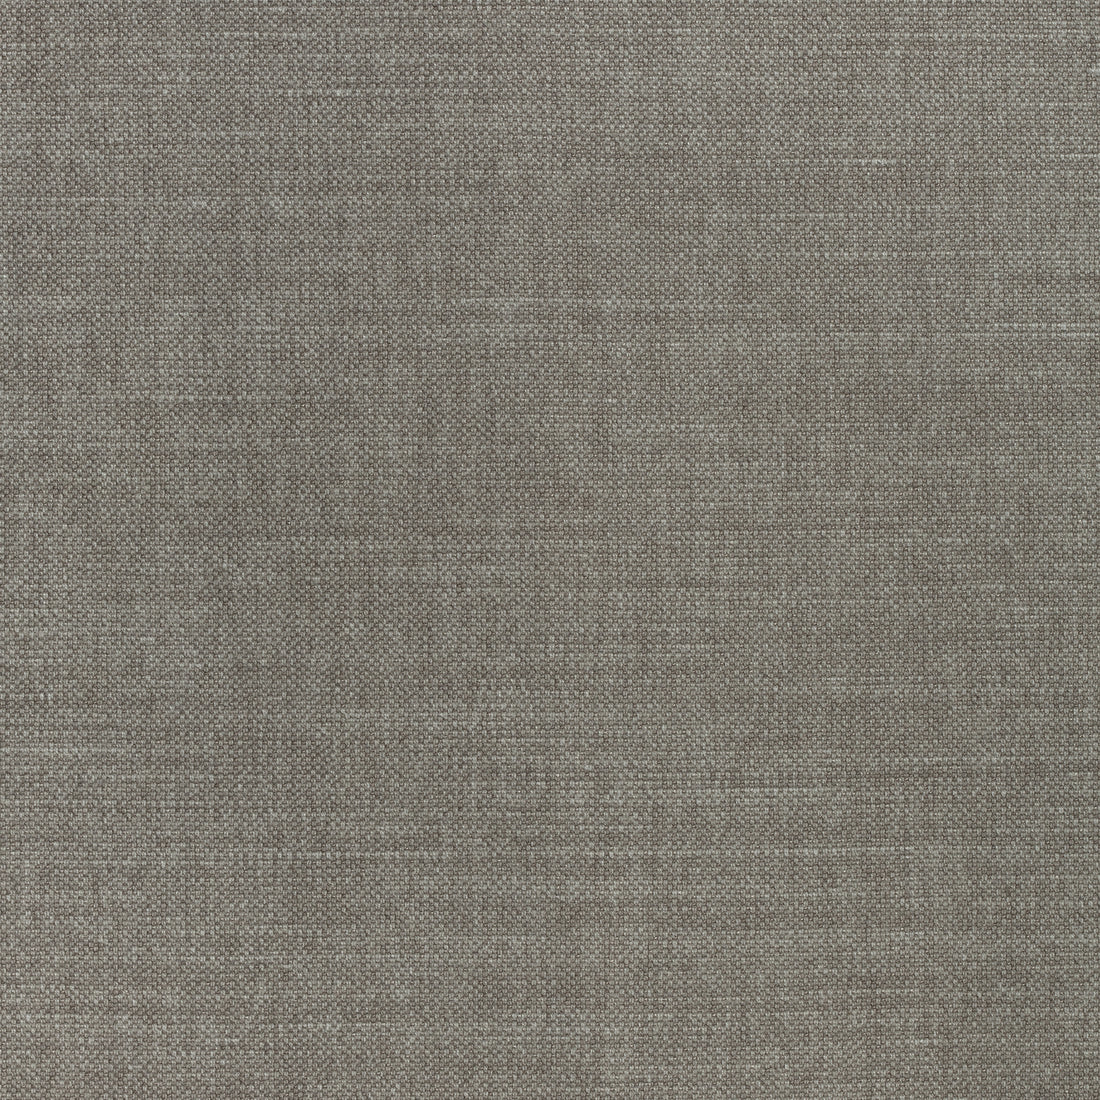 Prisma fabric in mink color - pattern number W70112 - by Thibaut in the Woven Resource Vol 12 Prisma Fabrics collection